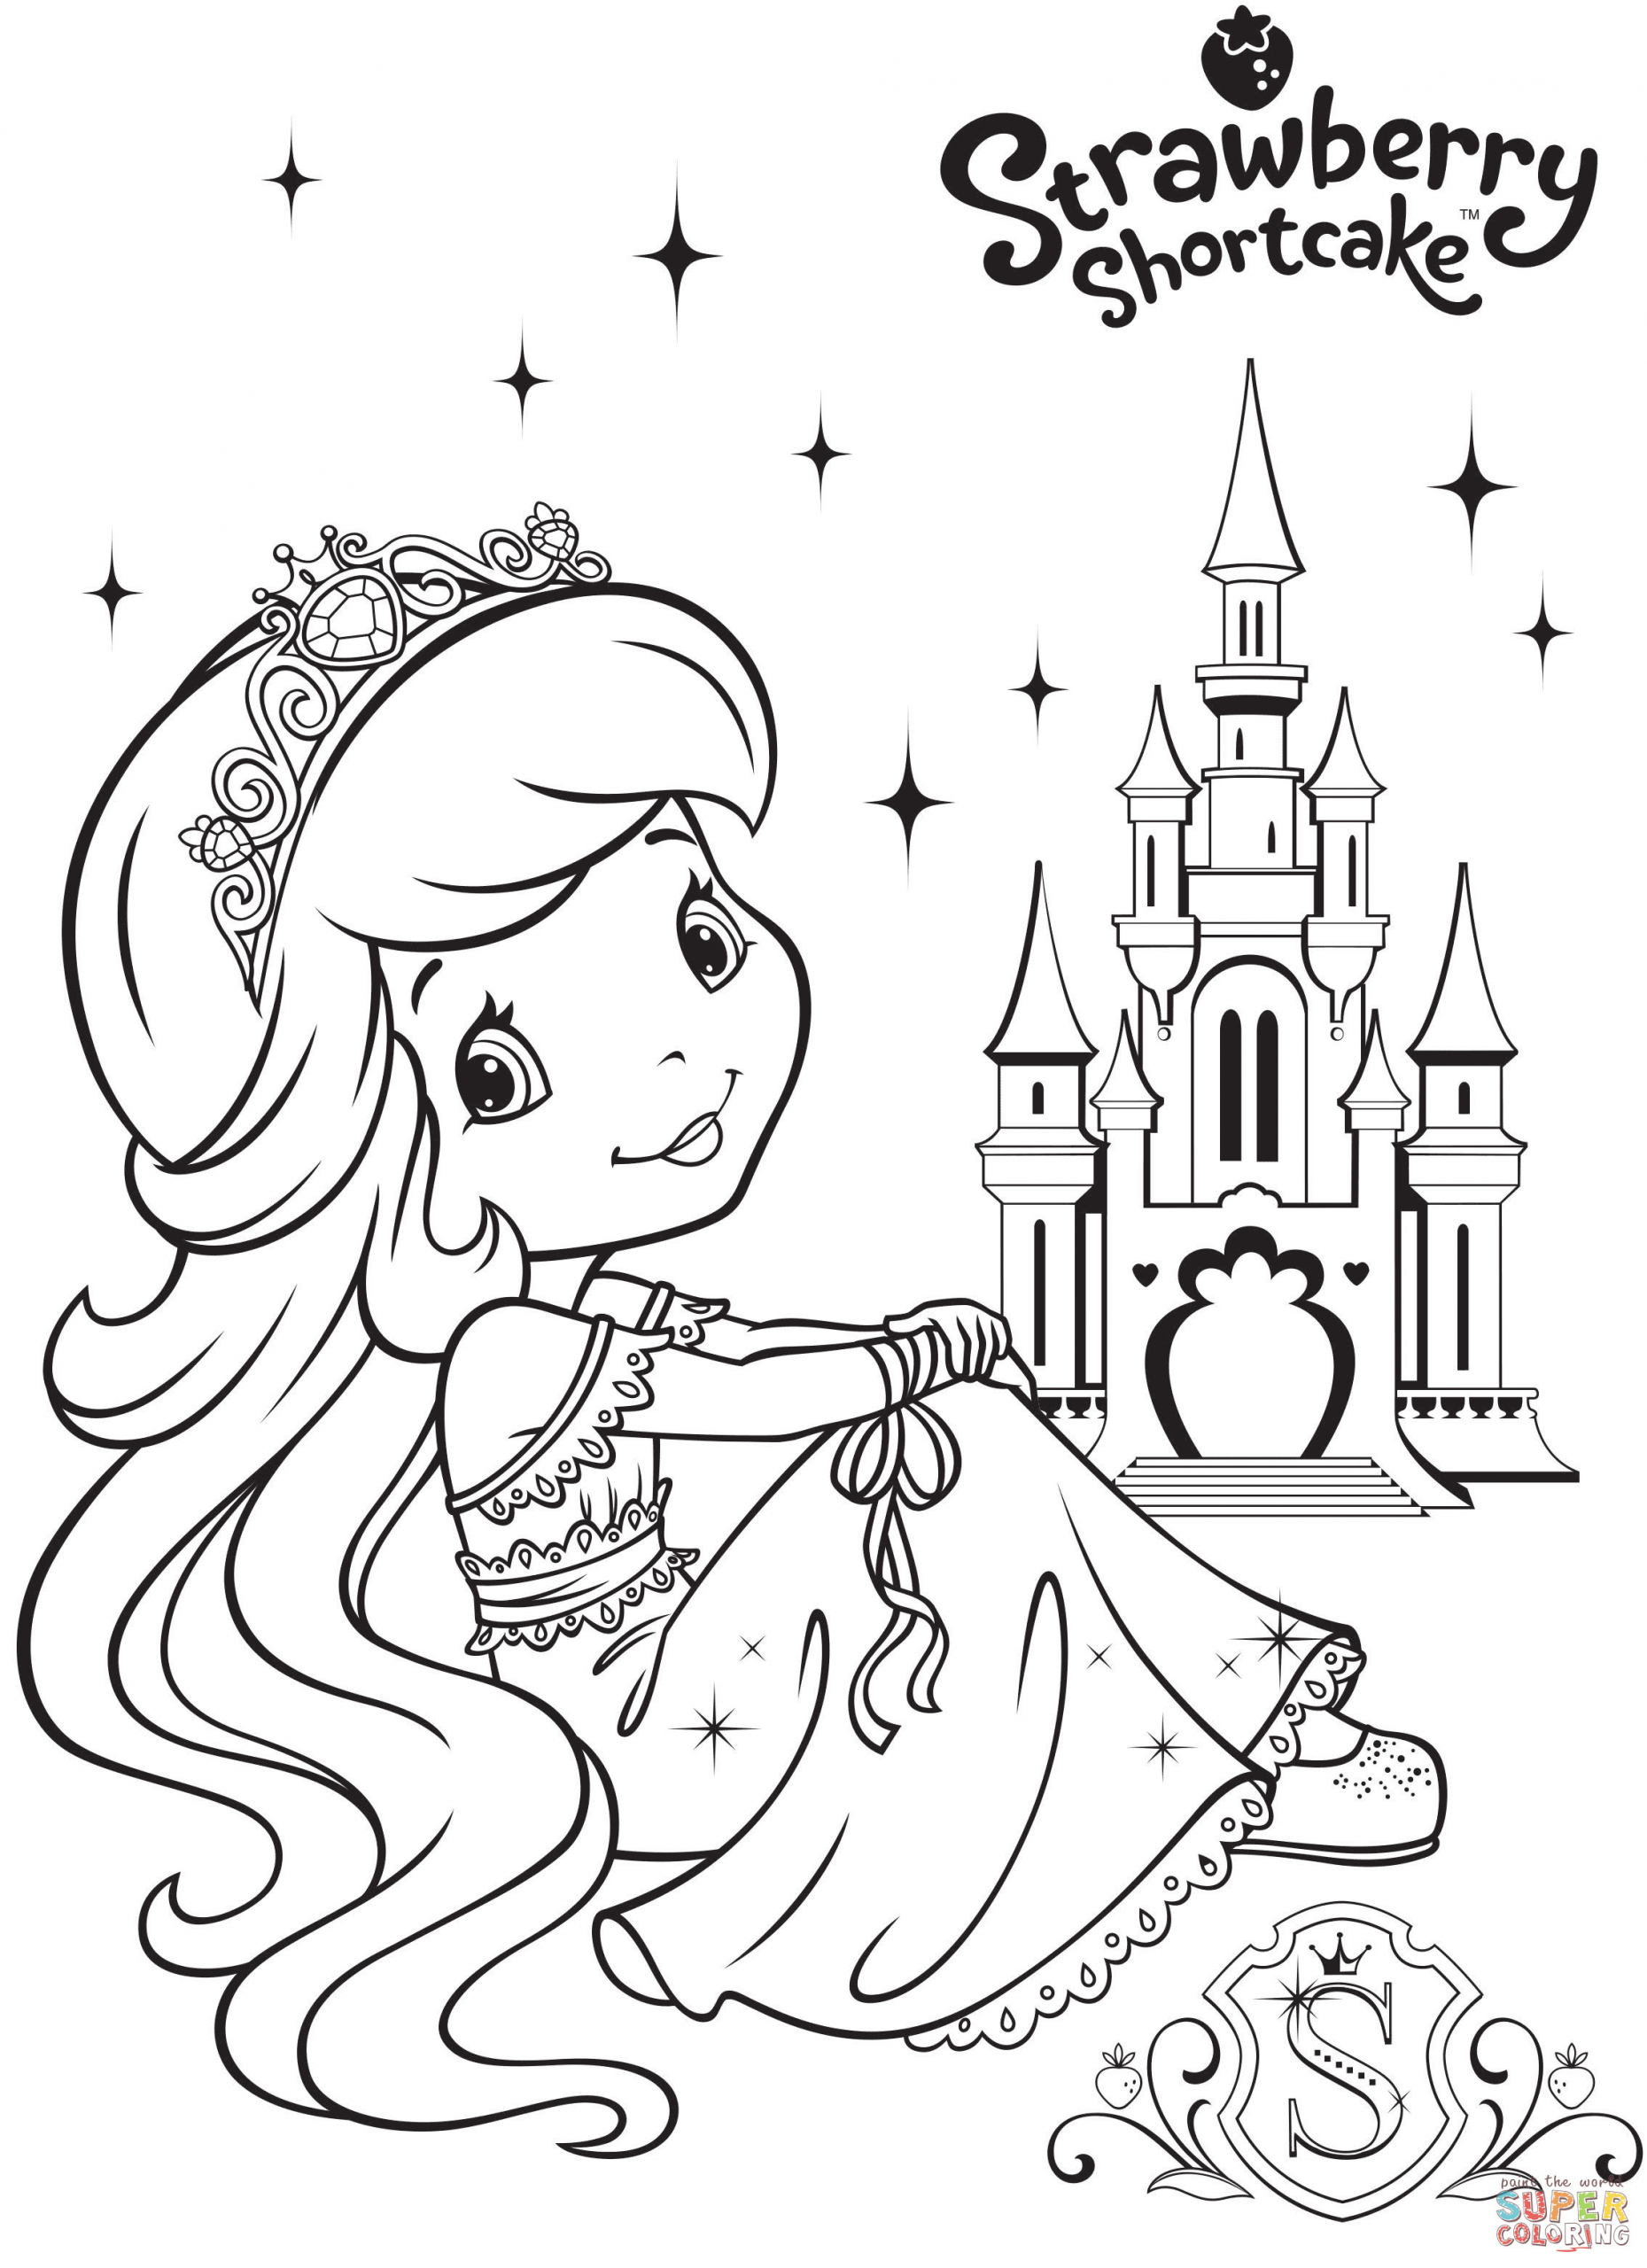 Strawberry Shortcake Printable Coloring Pages
 Strawberry Shortcake and Strawberry Castle coloring page